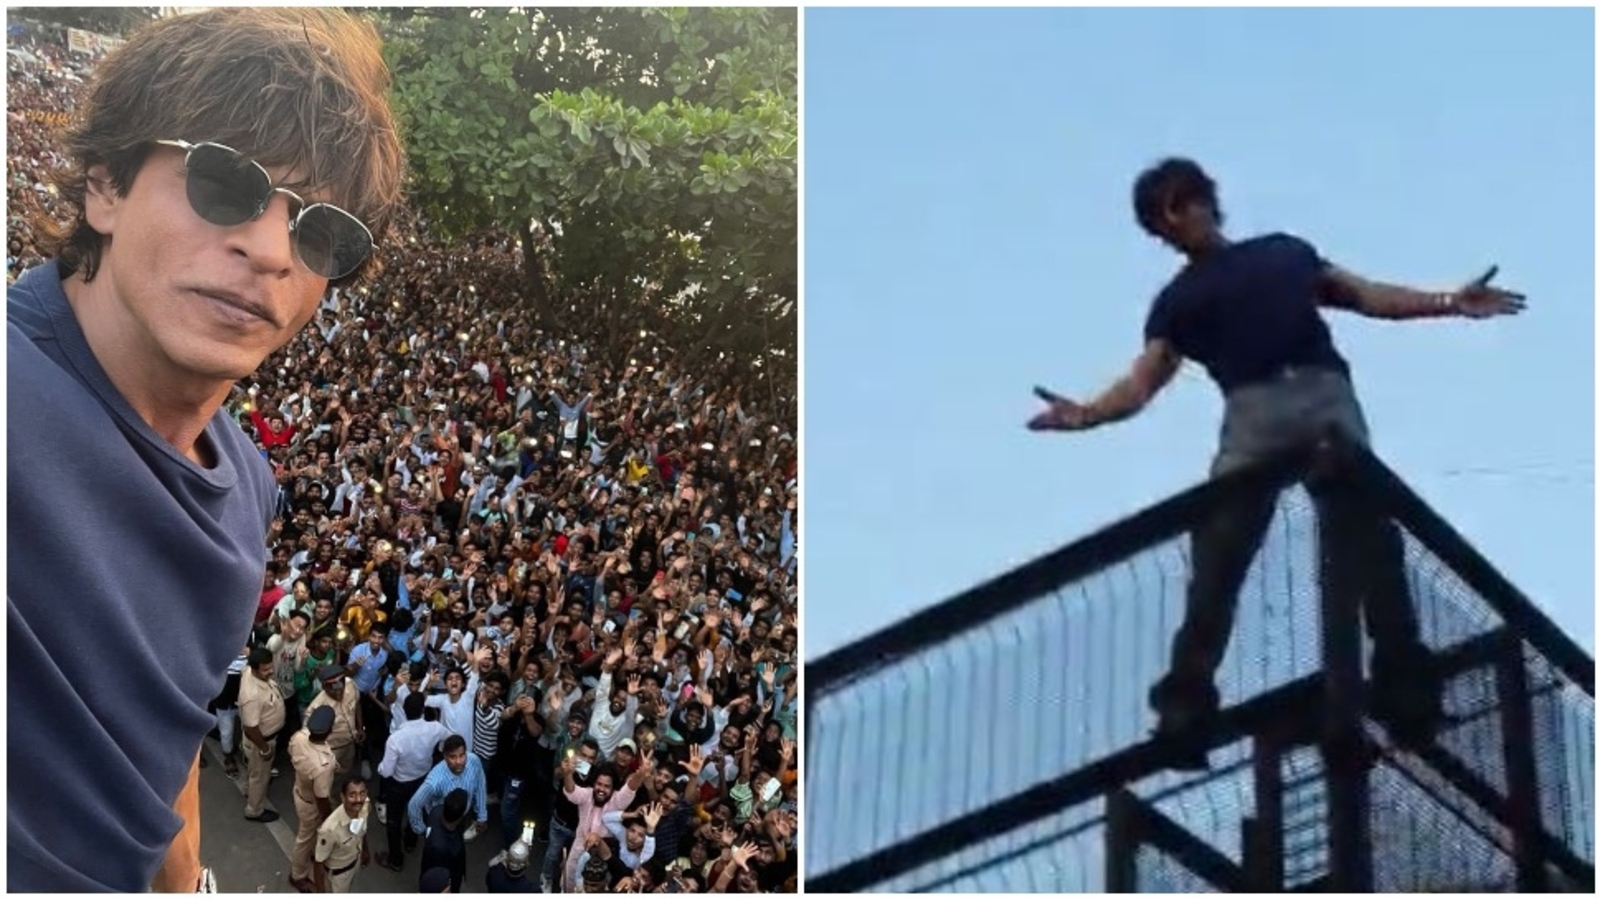 Shah Rukh Khan greets cheering fans outside Mannat on Eid for first time in two years, fans call it ‘perfect Eidi’